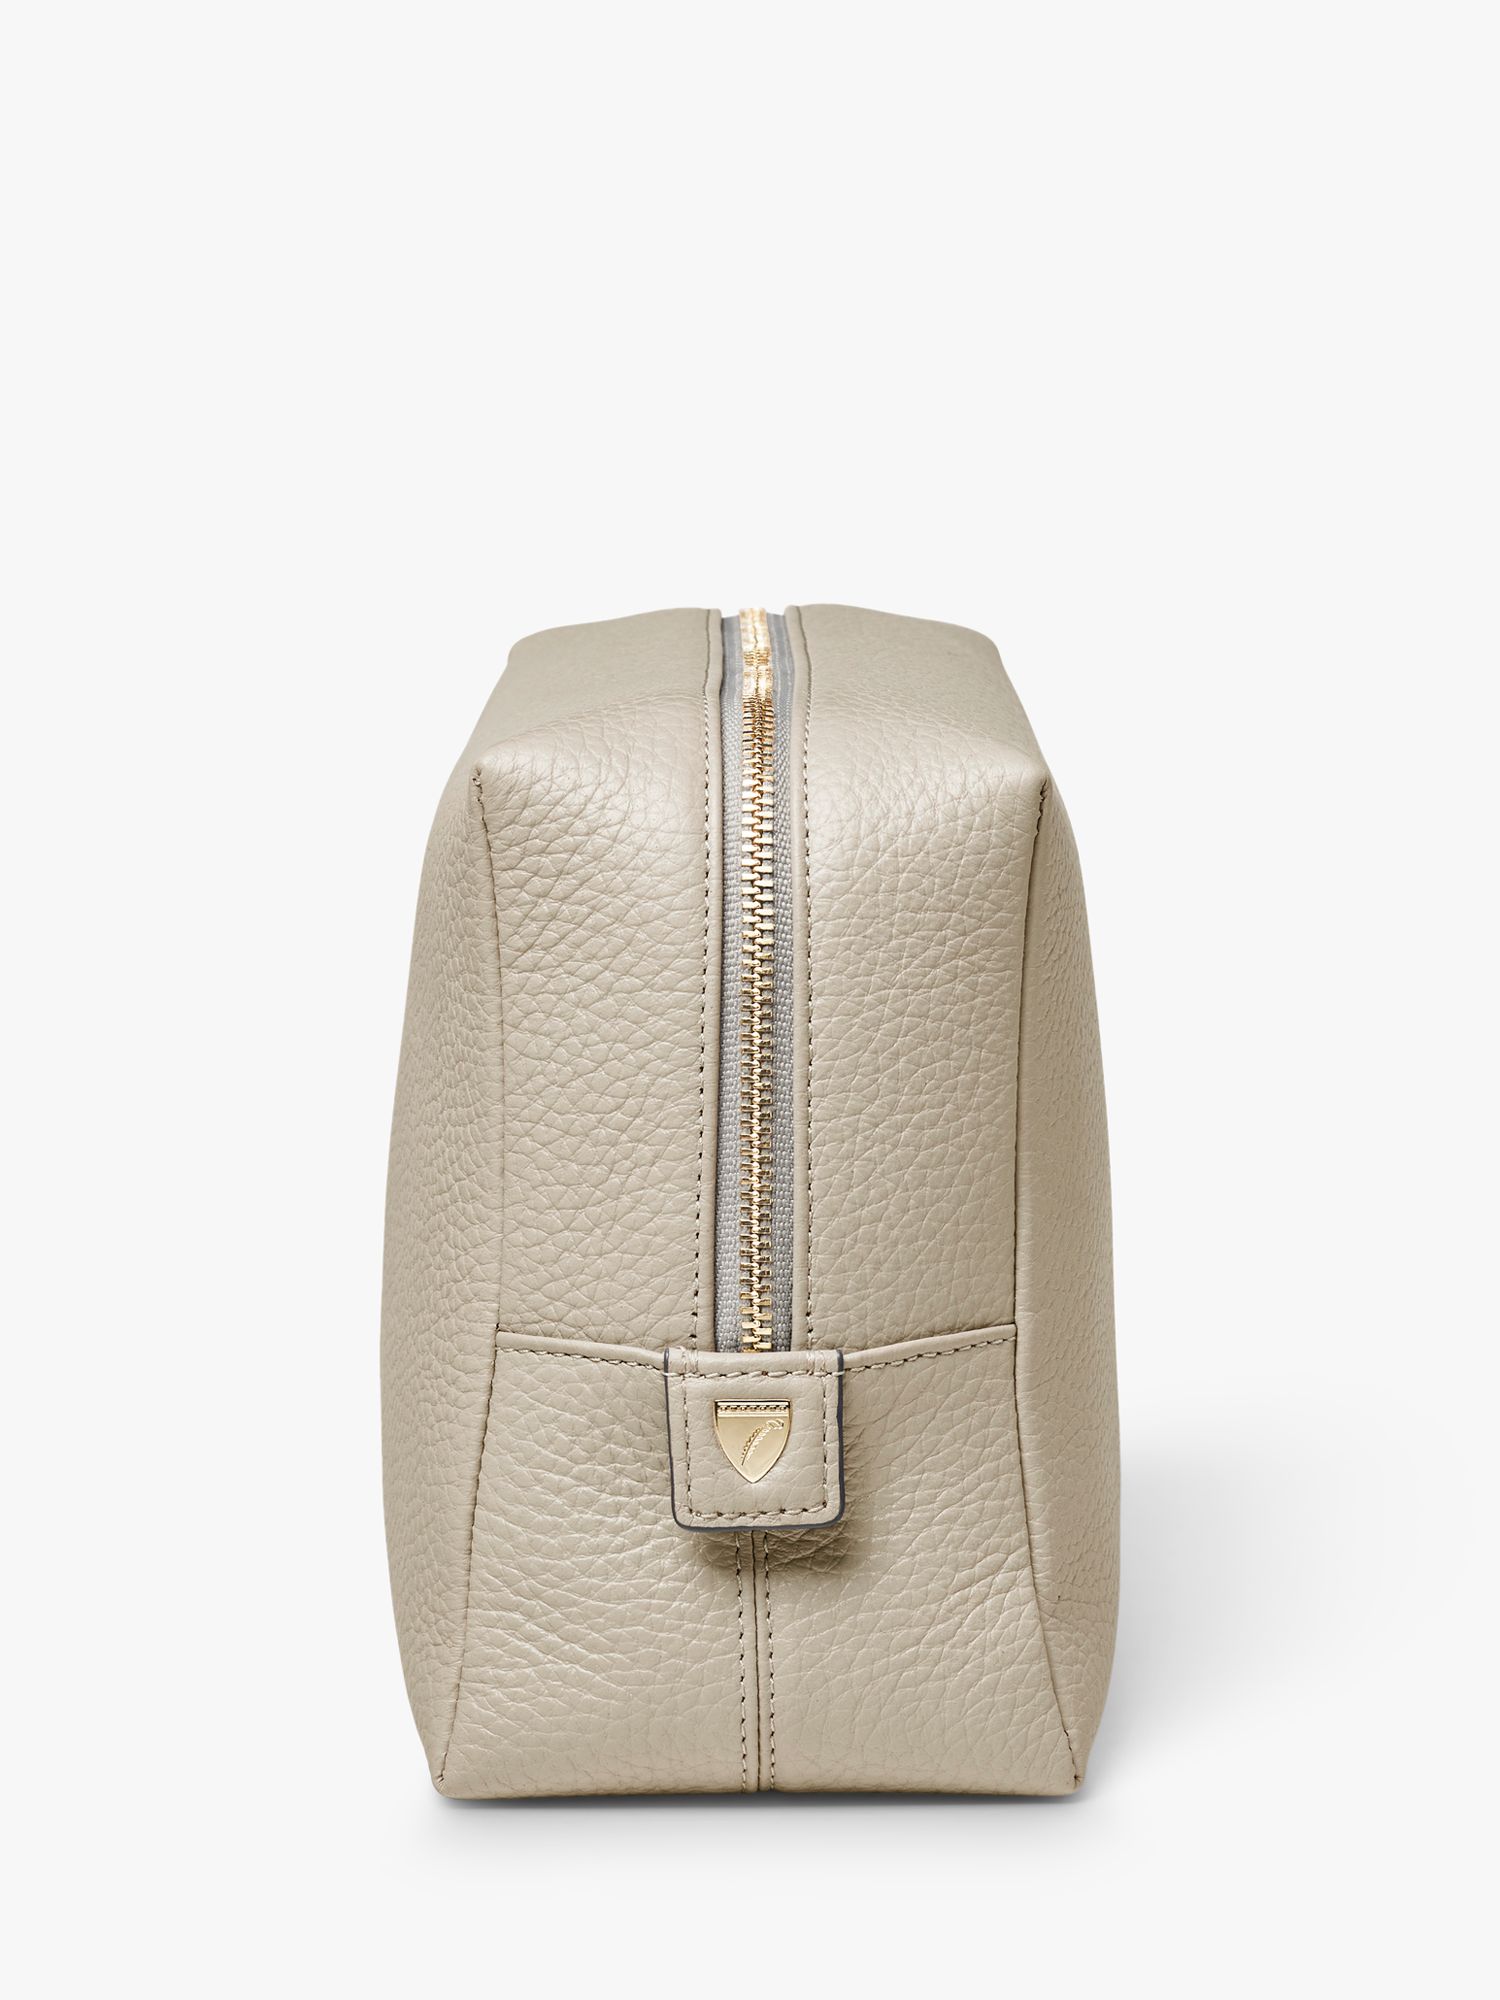 Buy Aspinal of London Large Pebble Leather Toiletry Bag Online at johnlewis.com